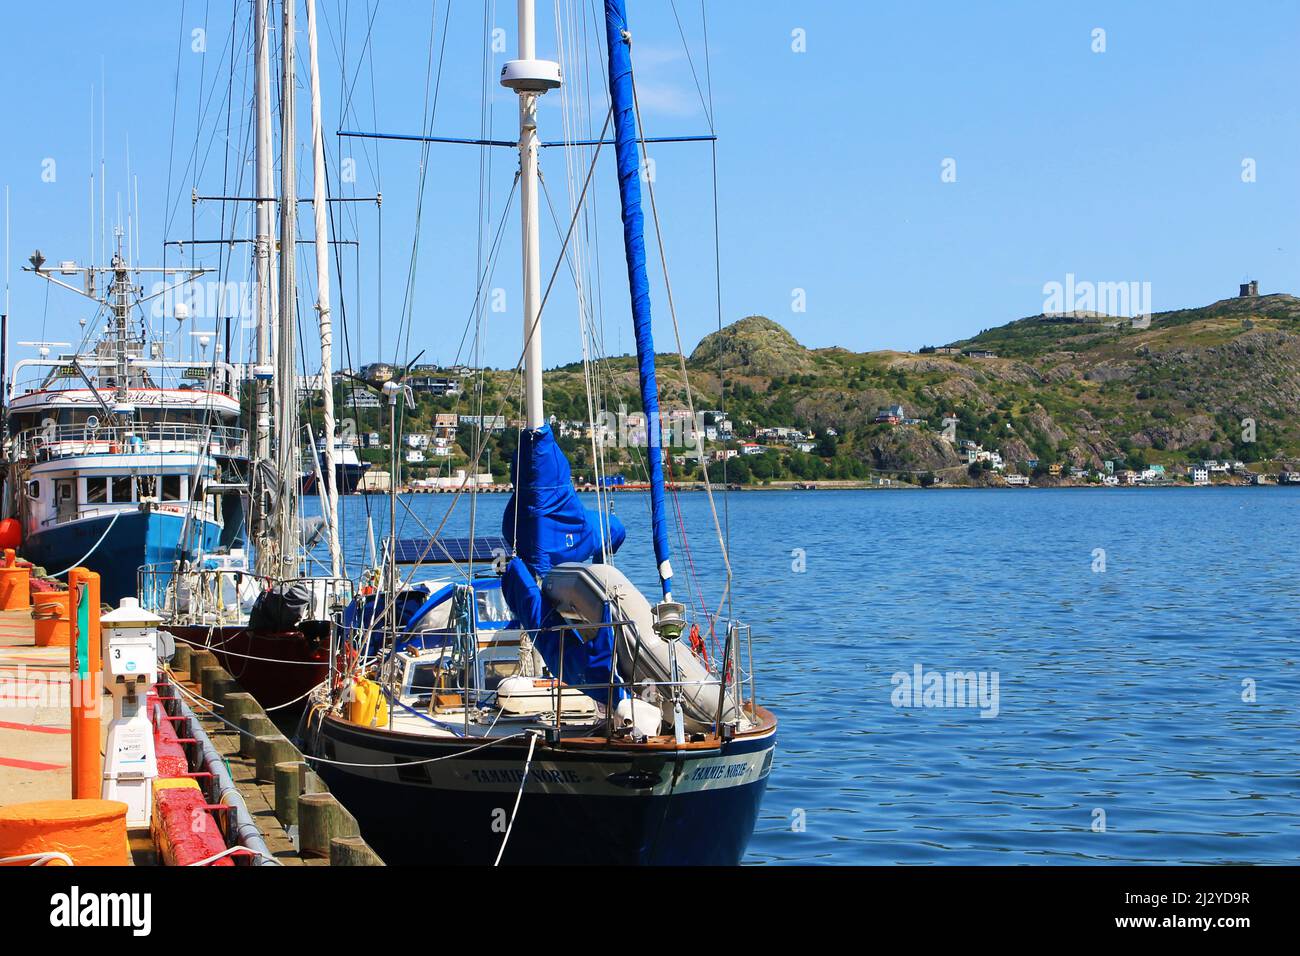 Ships and yachts moored to the pier, St. John's Harbour. Stock Photo